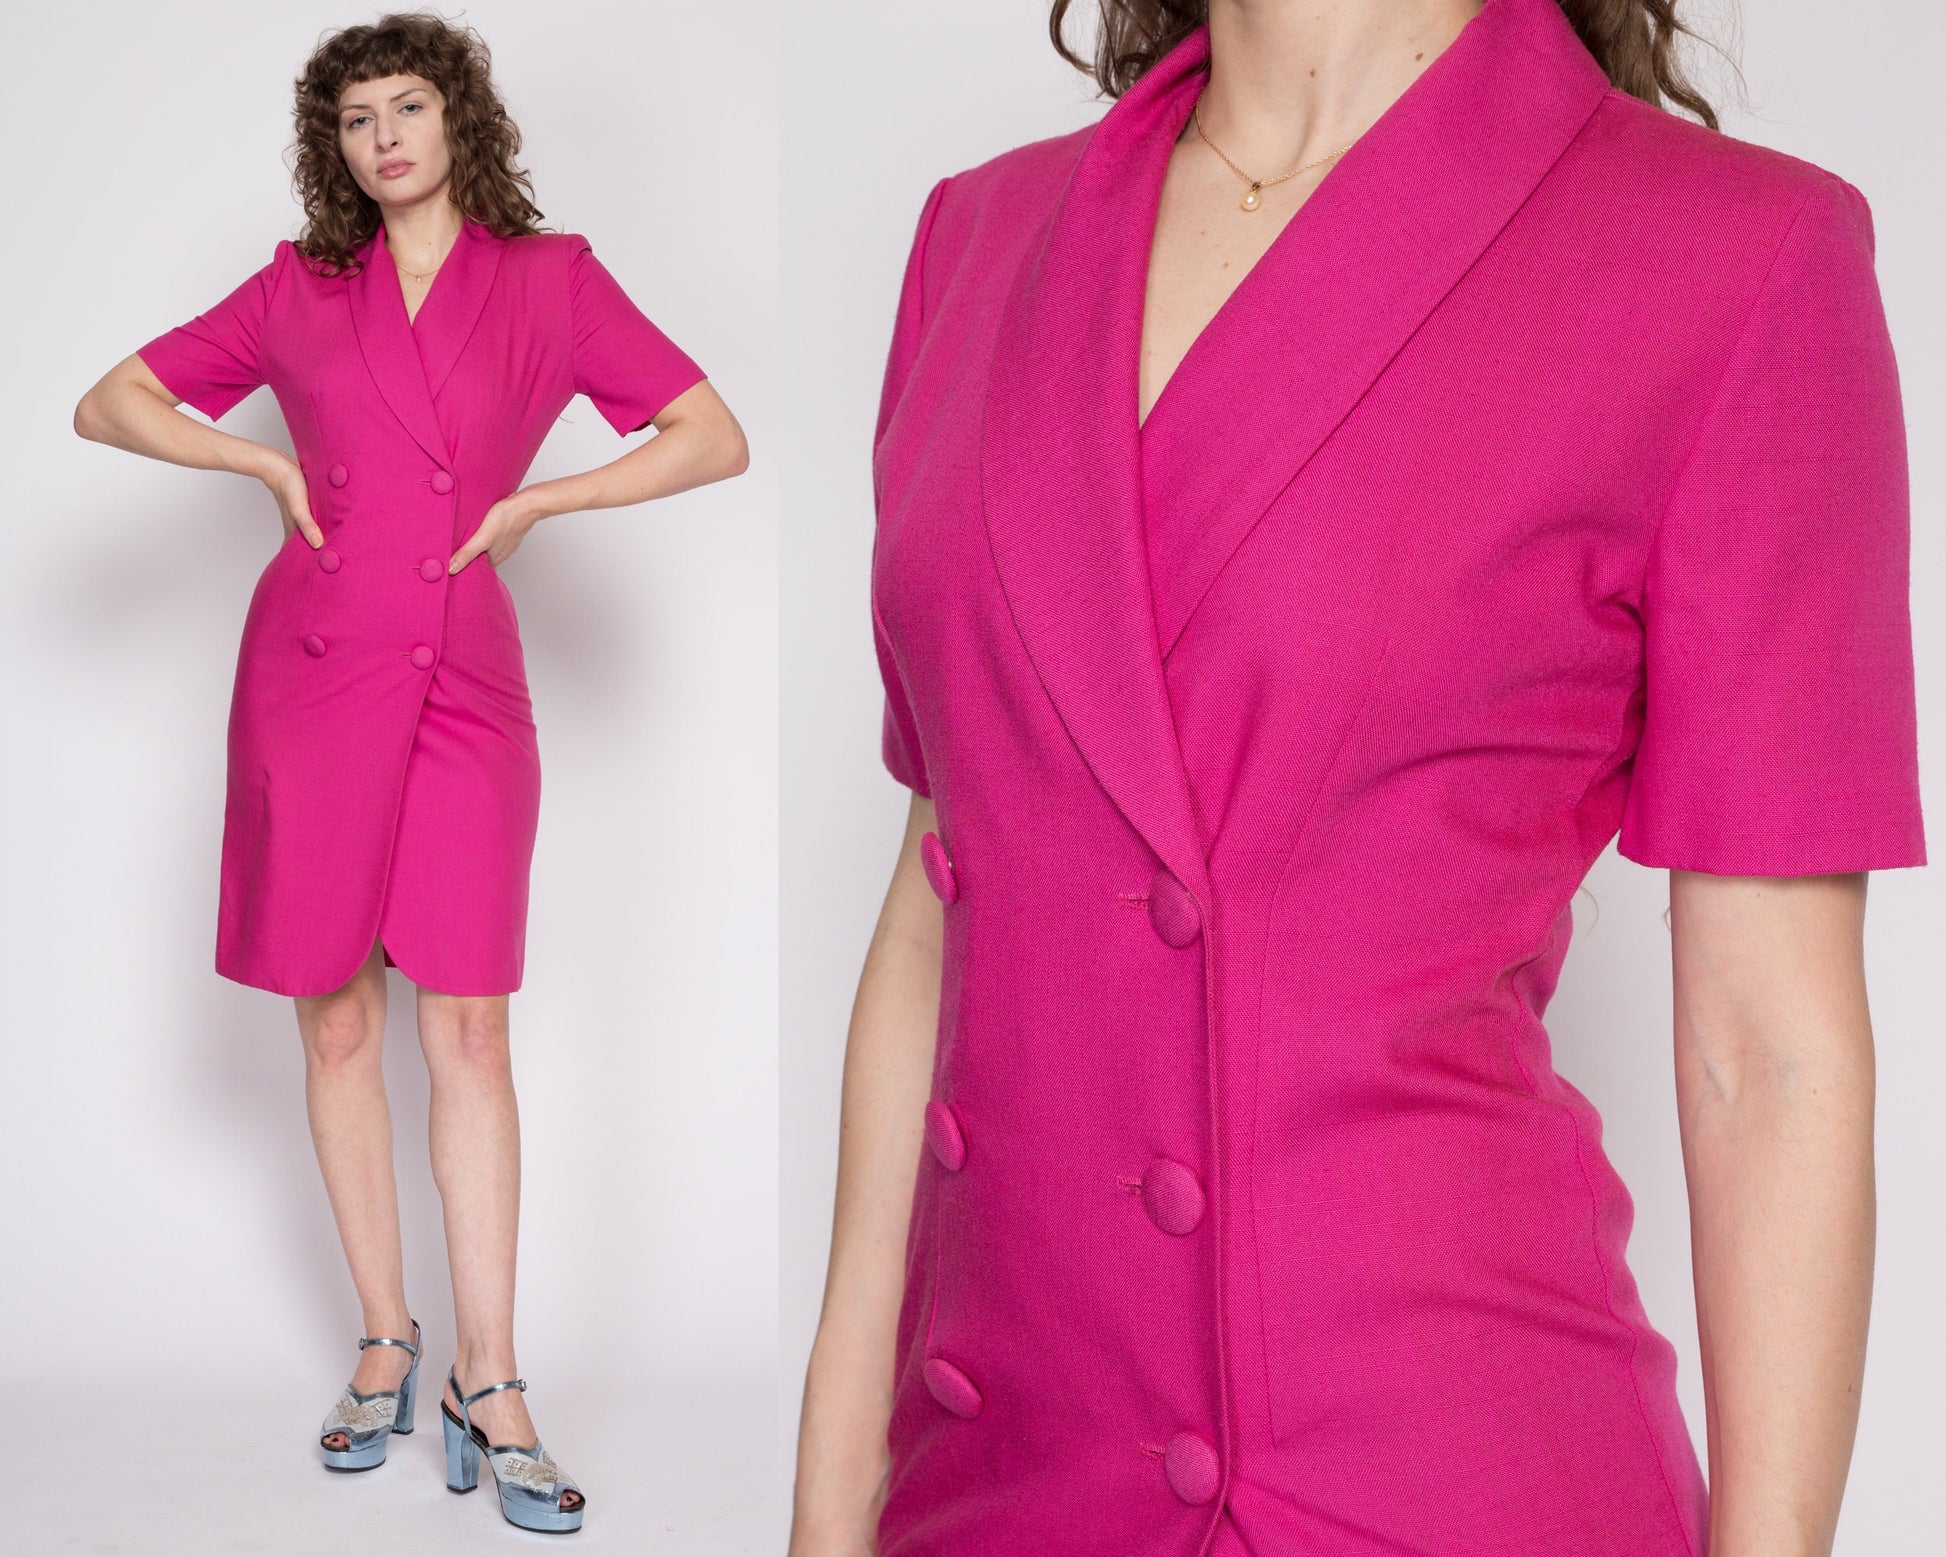 Small 80s Hot Pink Mini Suit Dress | Vintage Collared Double Breasted Short Sleeve Dress